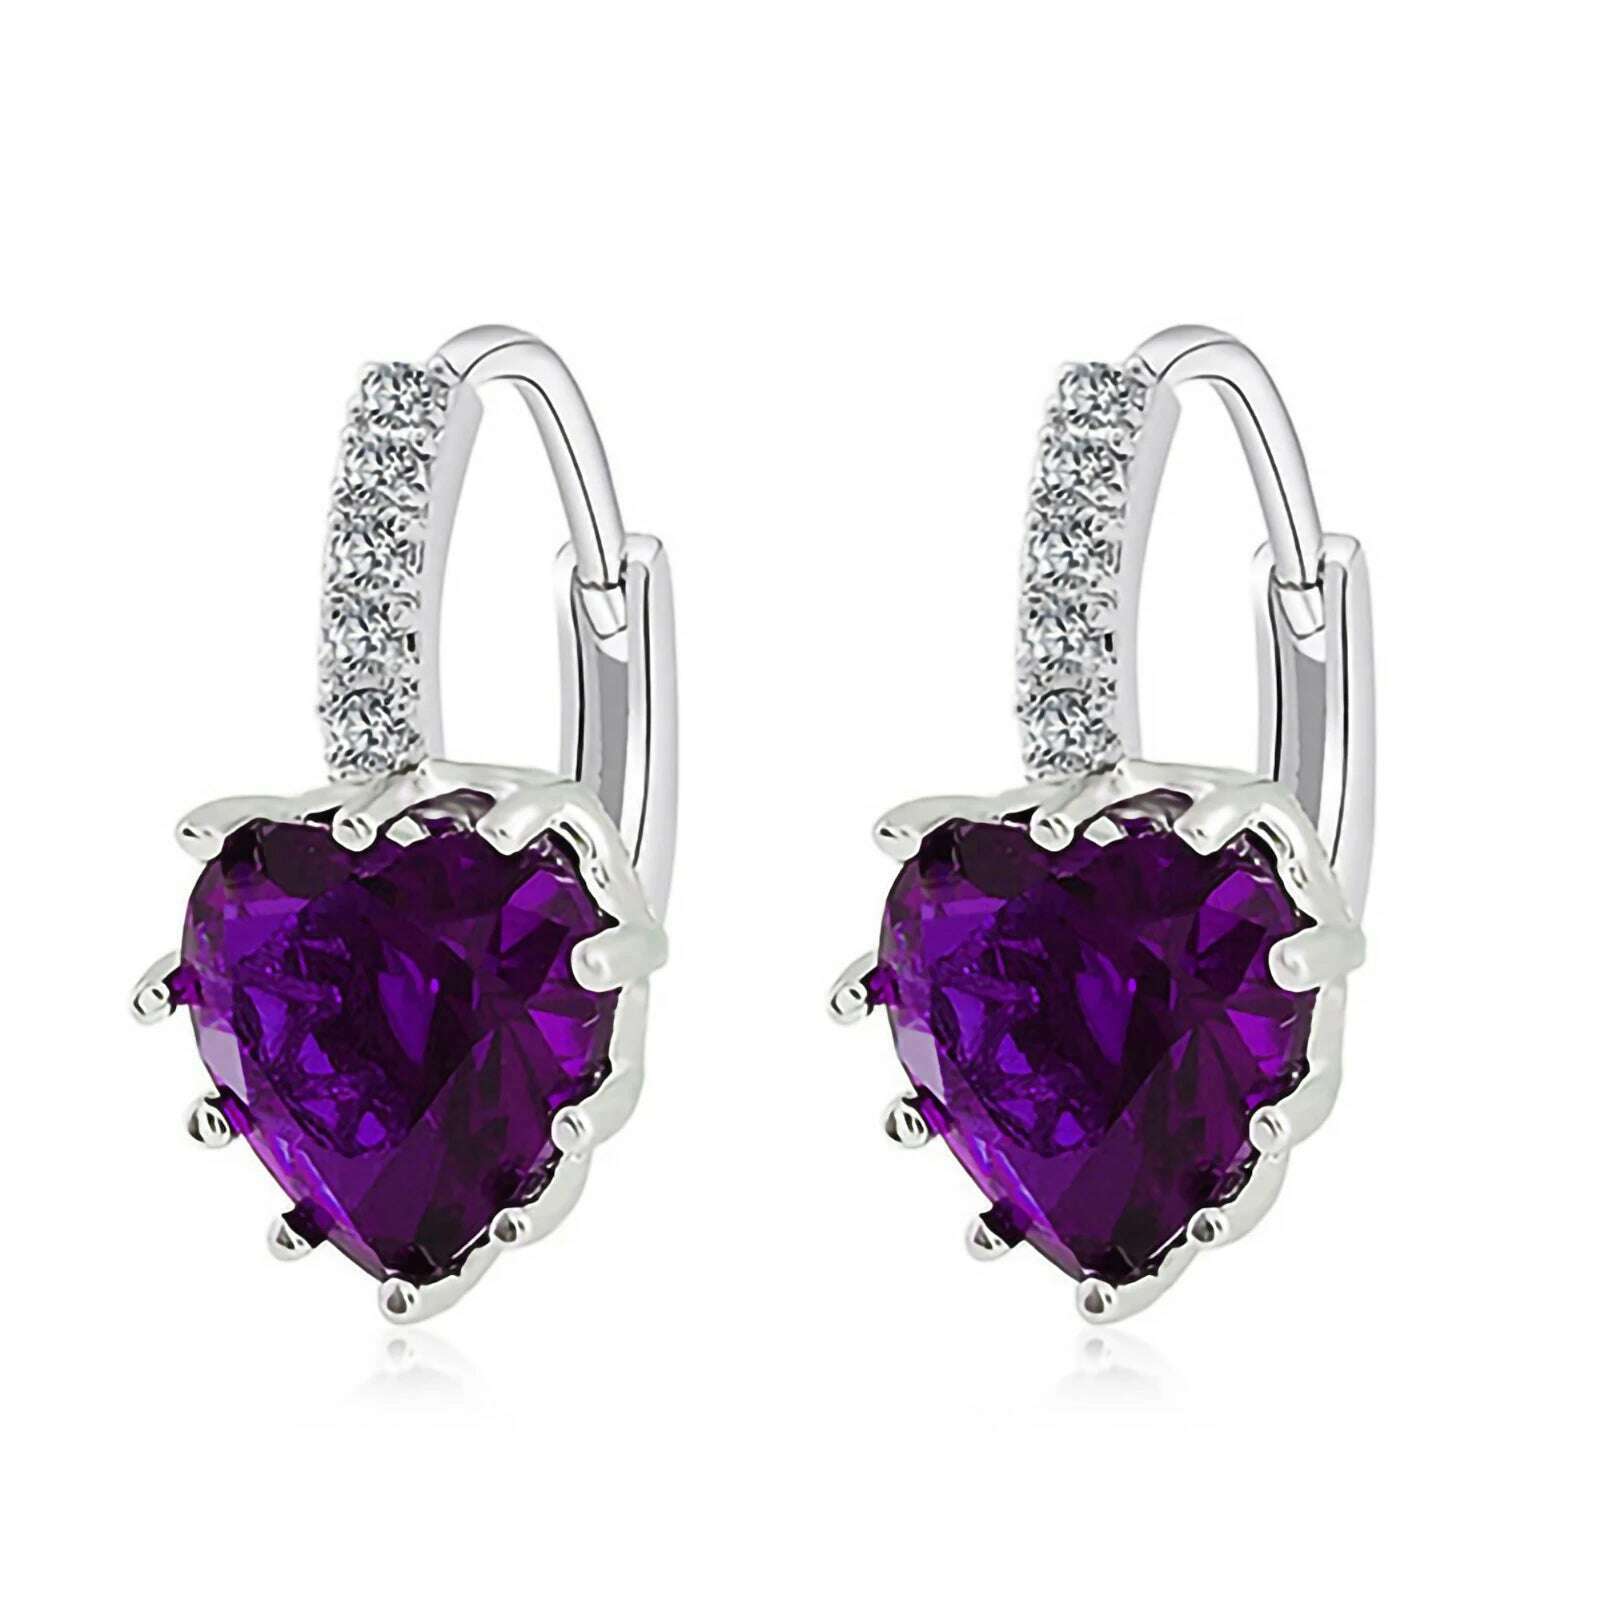 KIMLUD, HOT SALES!!! Women's Luxury Pink Love Heart Rhinestone Gold Plated Leverback Hoop Earrings fashion jewelry accessory 17 x 19mm, Purple / United States, KIMLUD Womens Clothes